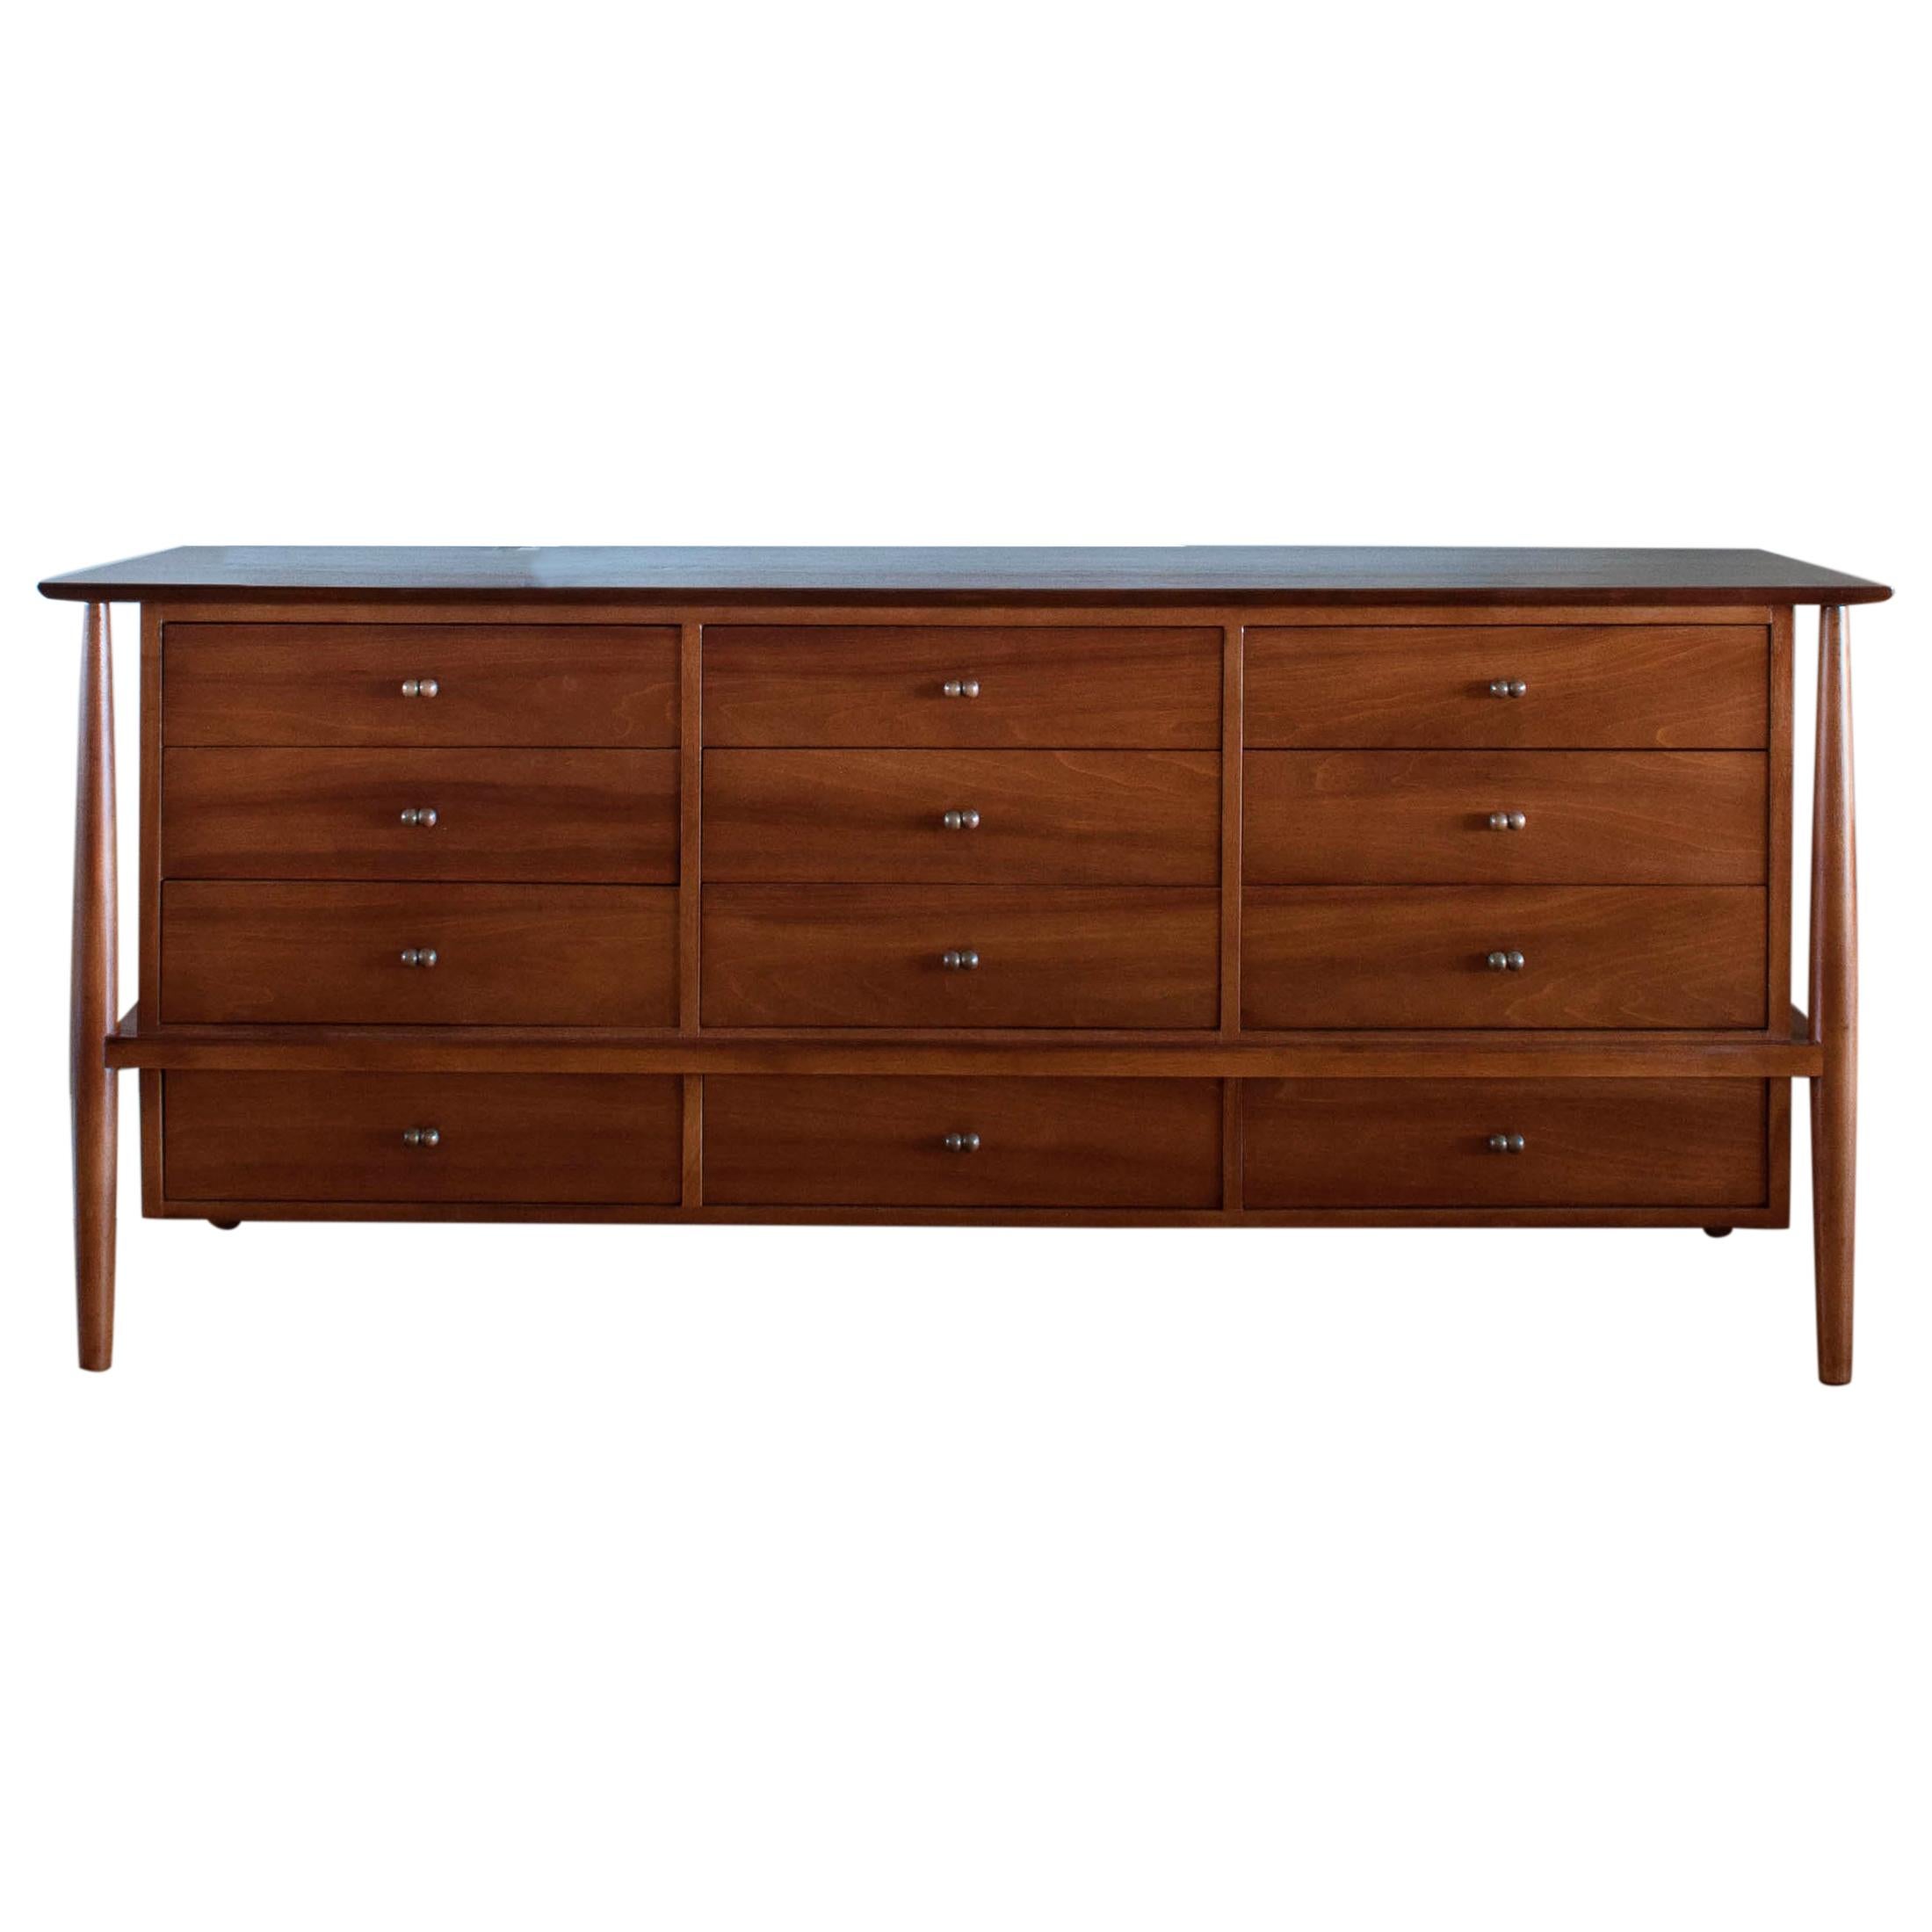 Mount Airy Walnut and Brass Credenza Dresser For Sale